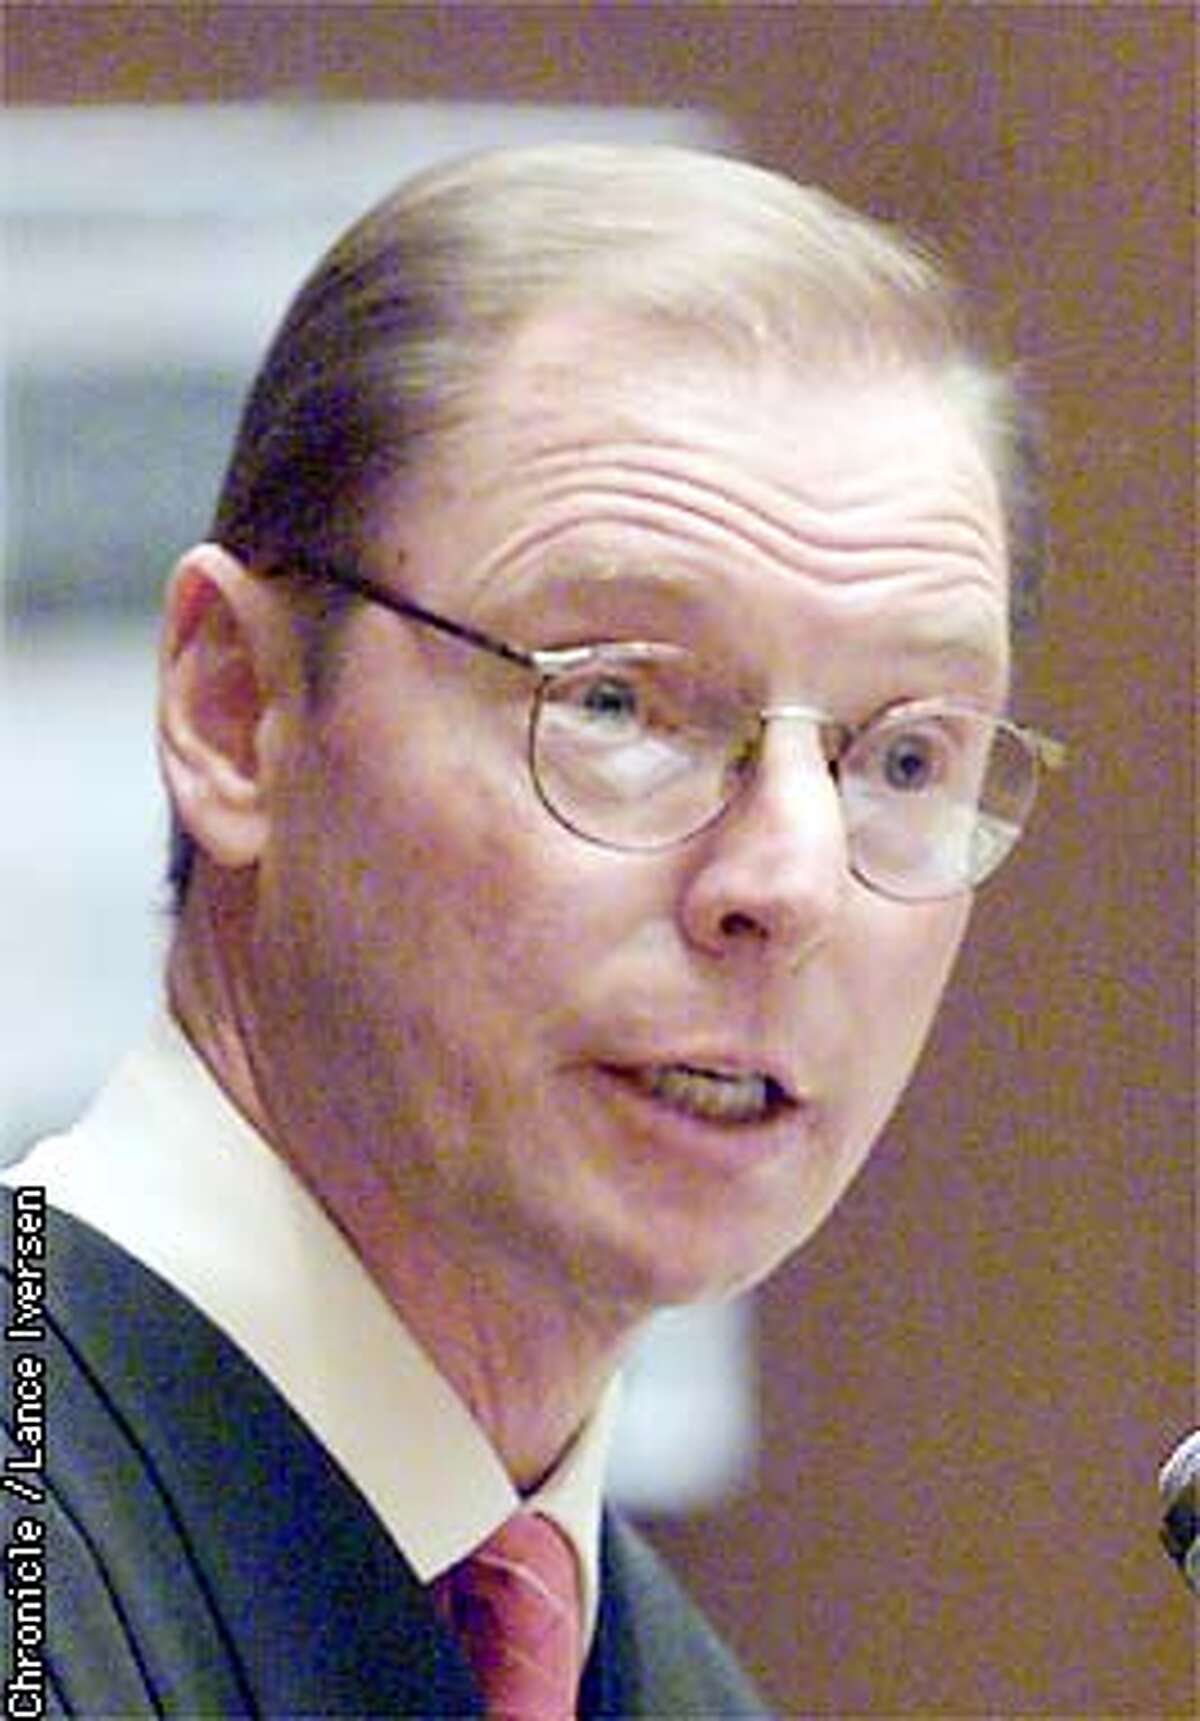 Superior Court Judge James Warren addresses the jury prior to its delivery of the verdicts in the San Francisco dog mauling trial in a courtroom in Los Angeles, Thursday, March 21, 2002. Two San Francisco attorneys, Marjorie Knoller and Robert Noel, were convicted on all five counts including a second-degree murder charge against Knoller, in the death of 33-year-old Diane Whipple. (AP Photo/Lance Iversen, Pool)